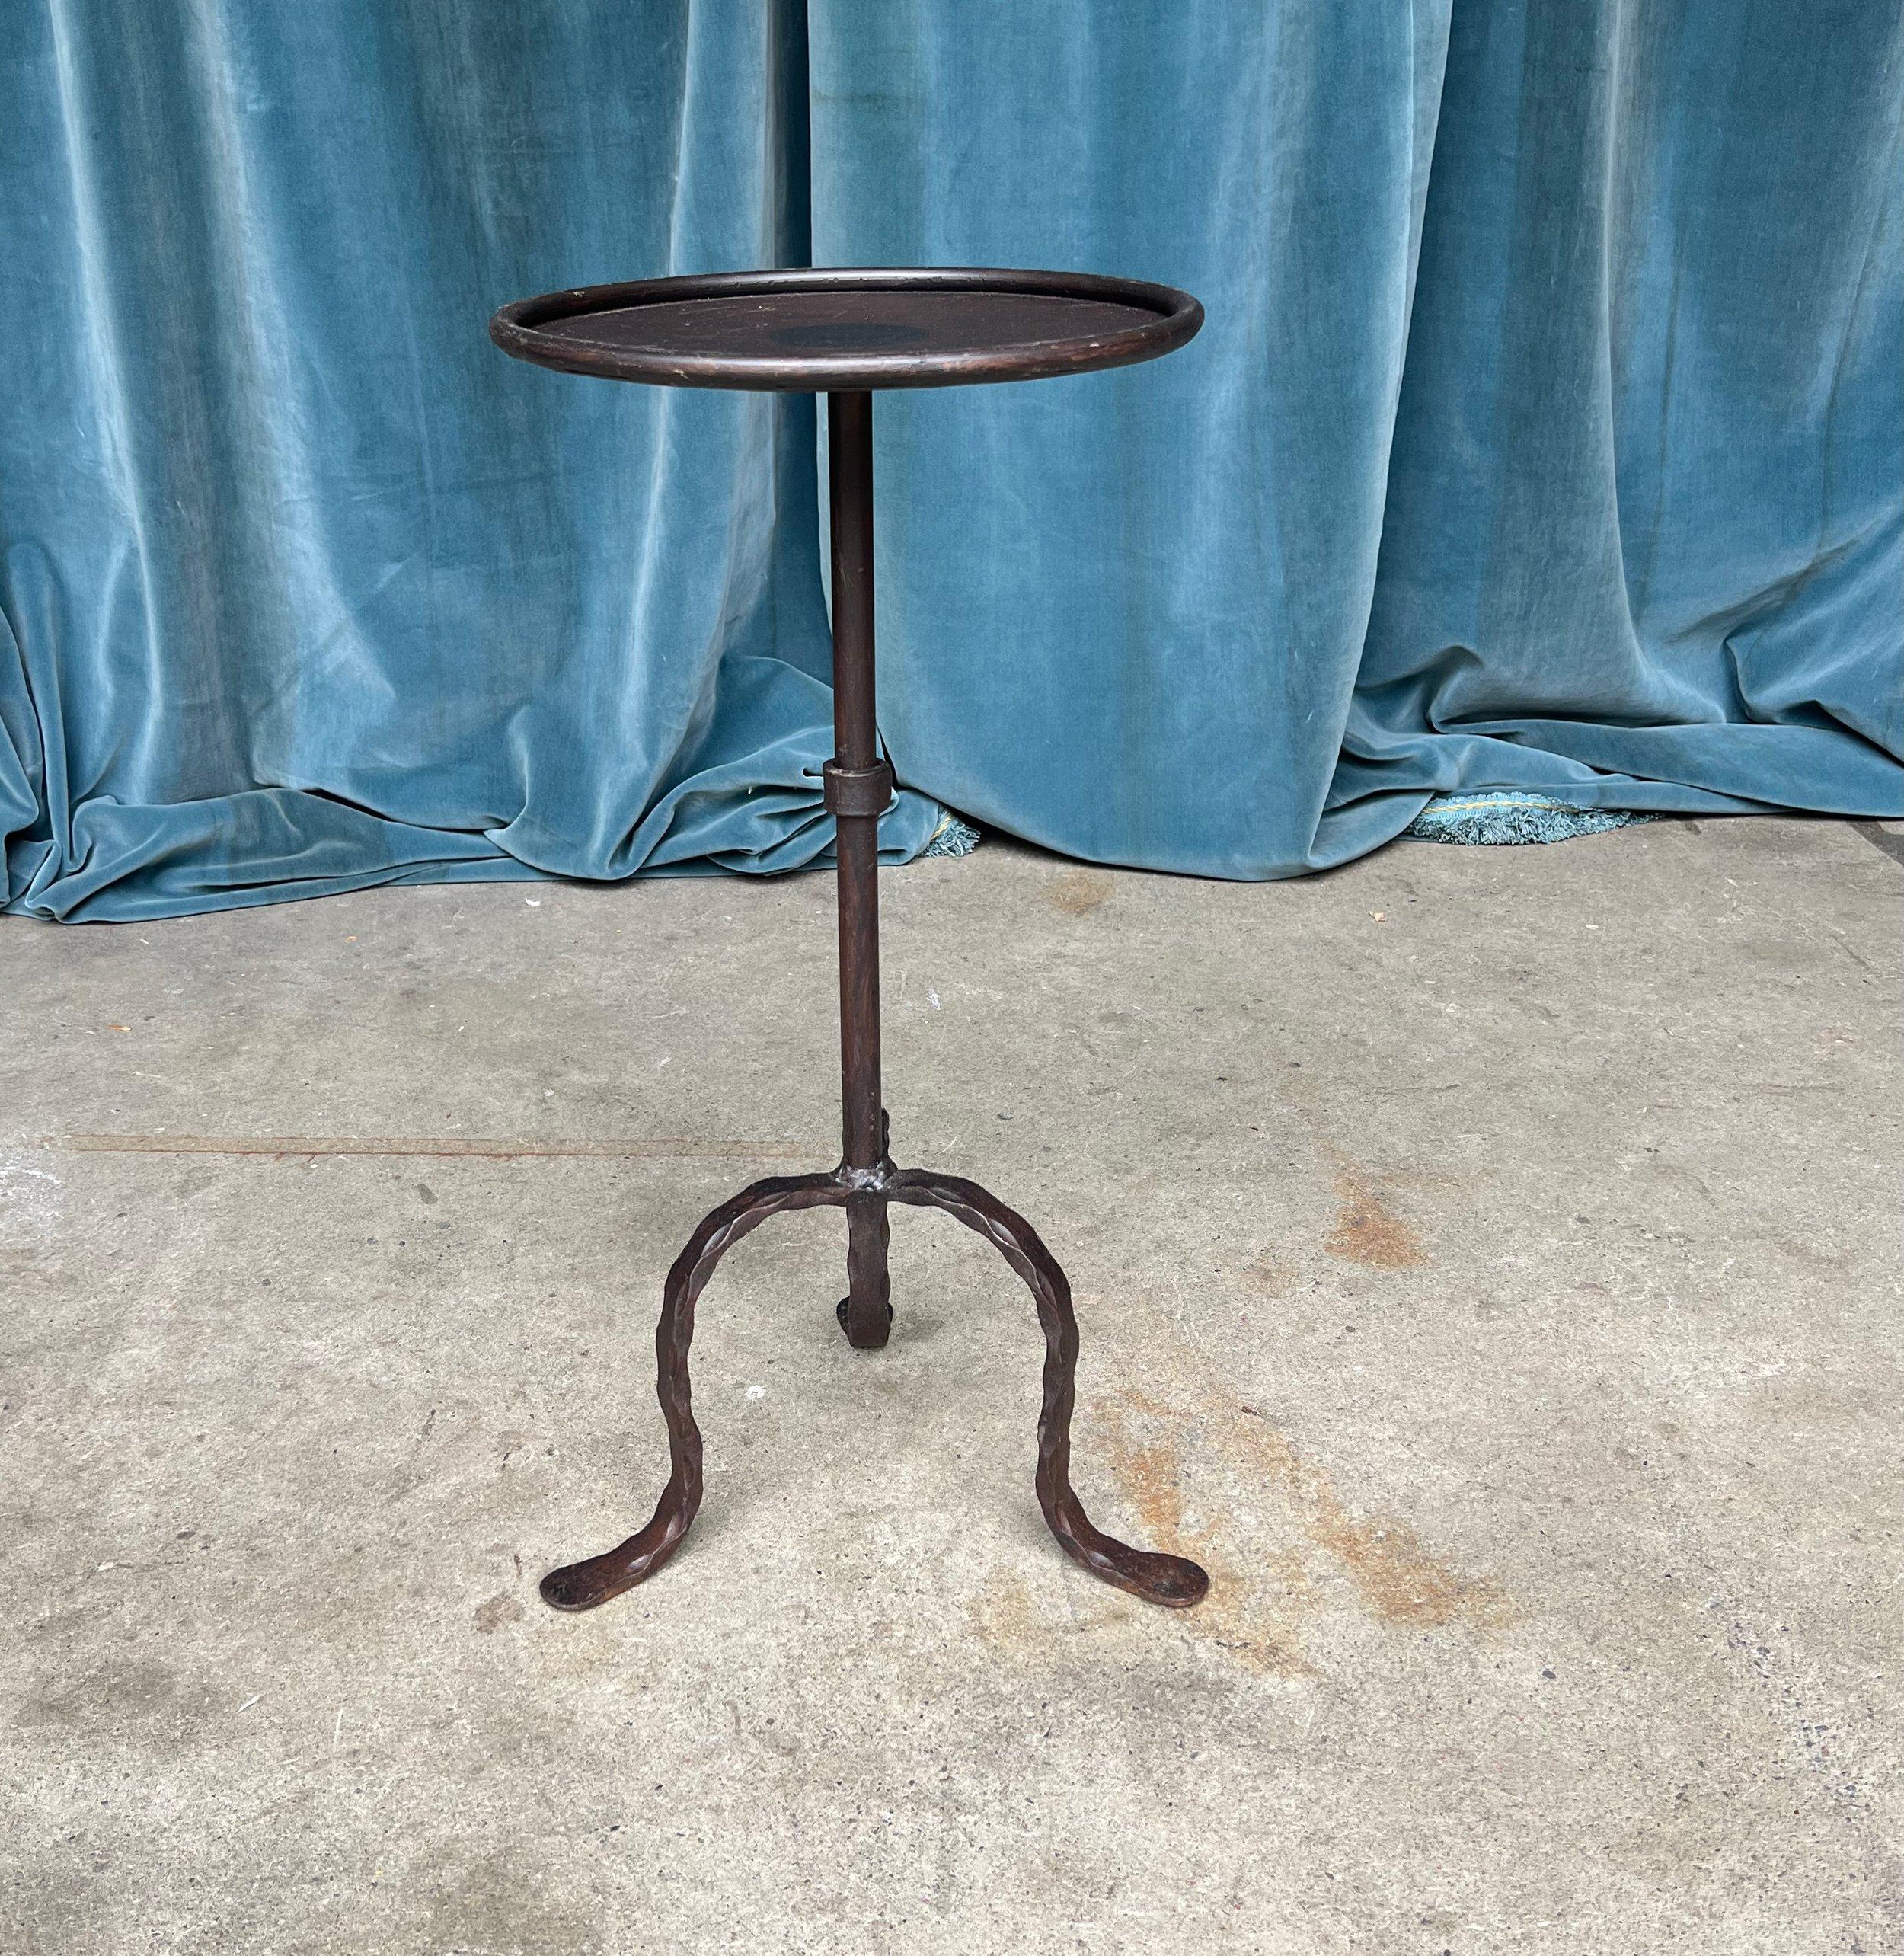 A charming small-scale Spanish iron drinks table from the 1950s, exuding elegance and vintage allure. The table features a circular central stem with a decorative collar accent, mounted on a tripod base with intriguing hammered effect legs. The